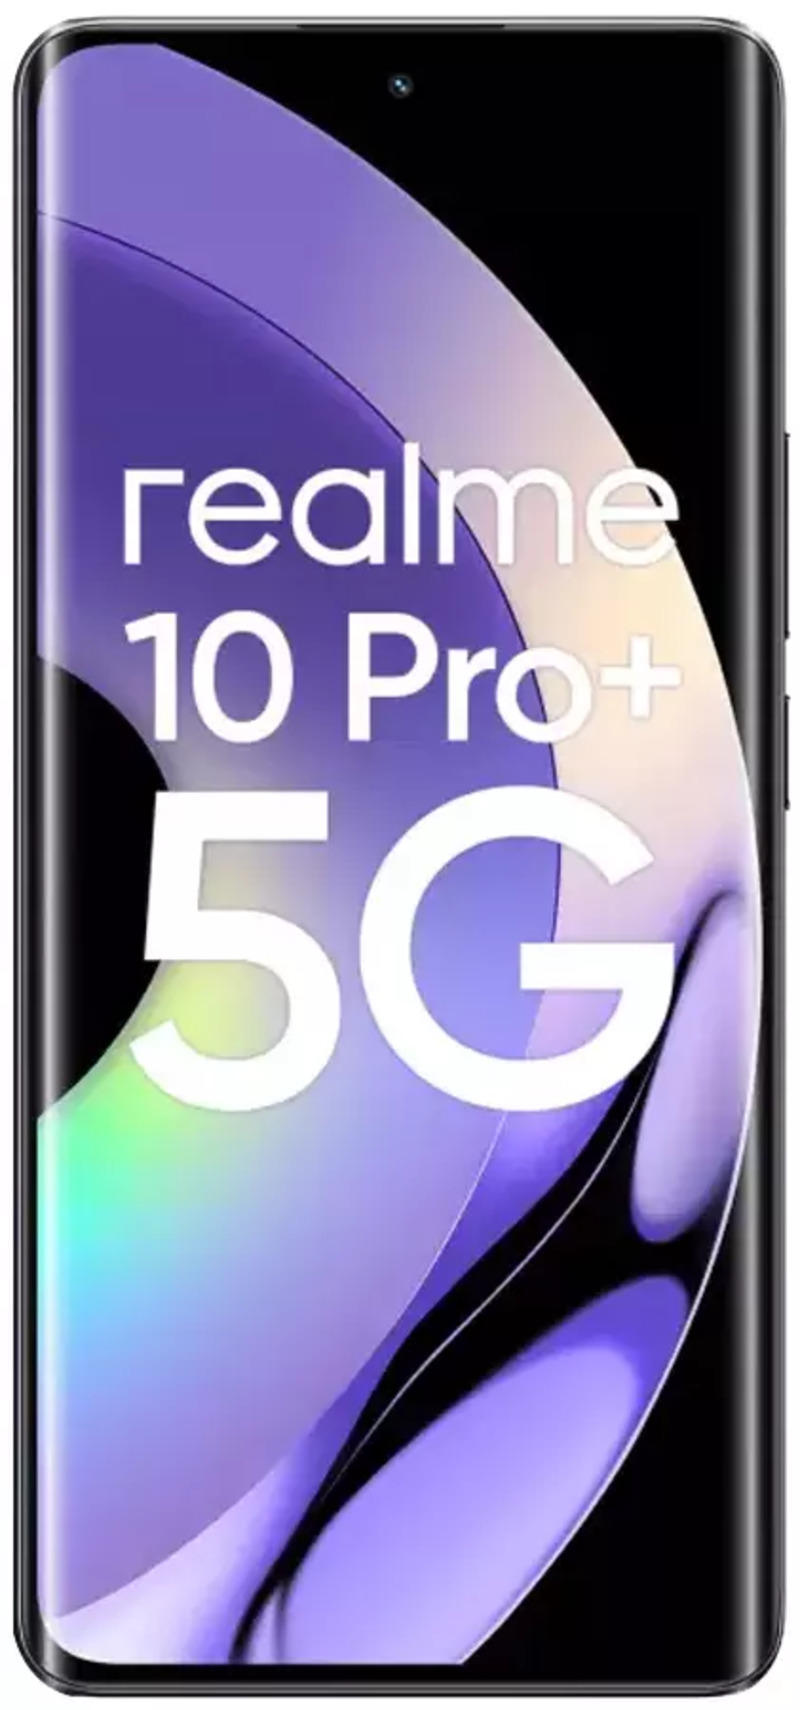 RealMe 10 Pro Plus 5G (128 GB Storage, 108 MP Camera) Price and features